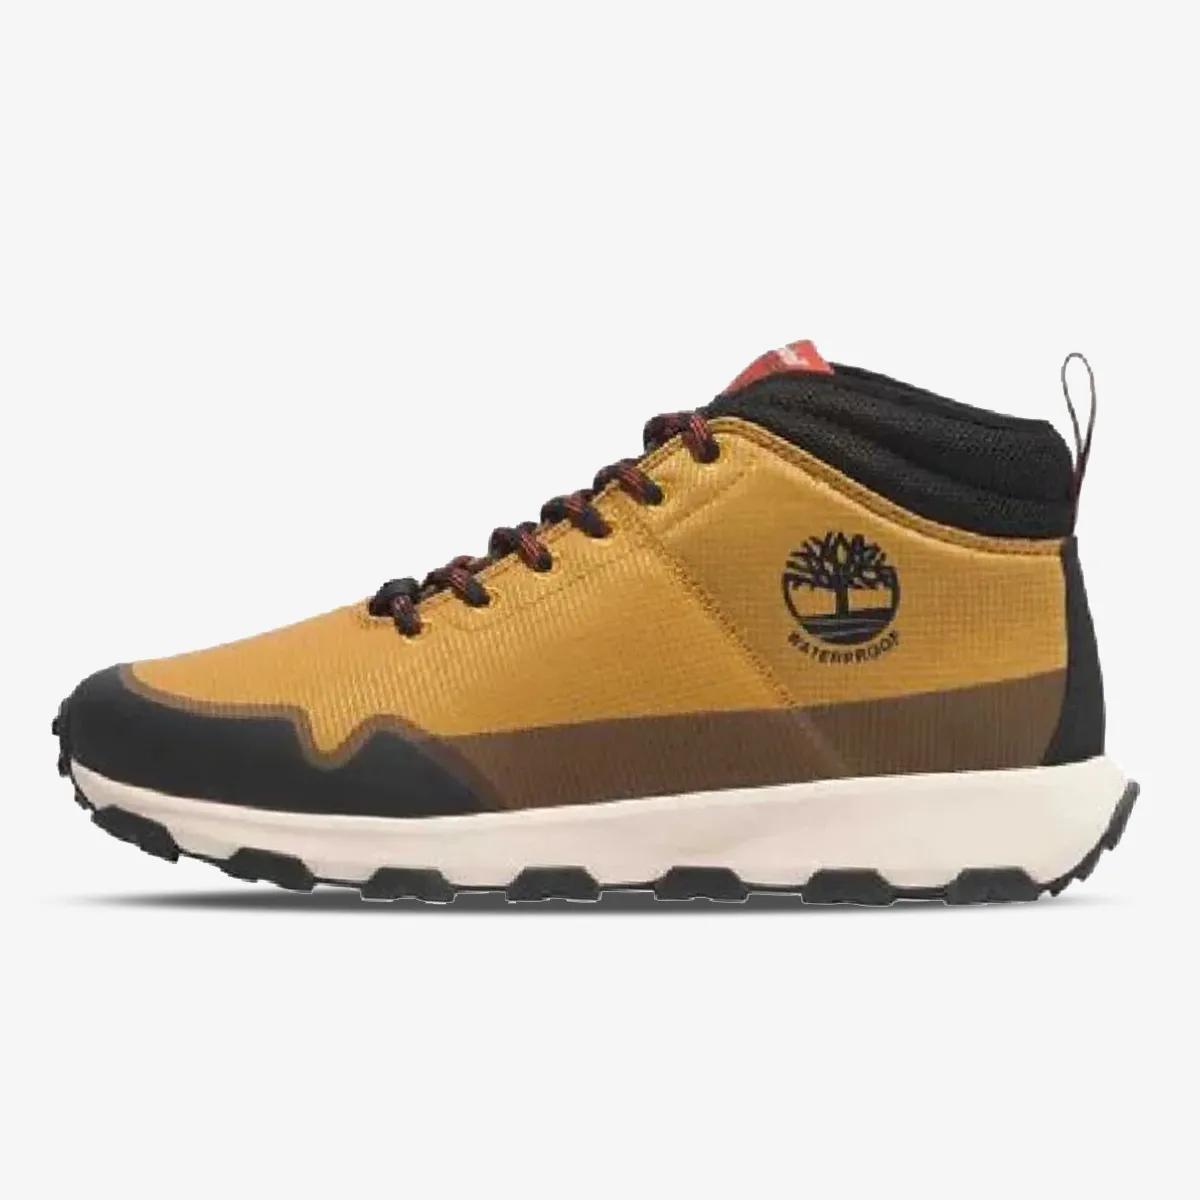 MID LACE UP WATERPROOF HIKING BOOT 